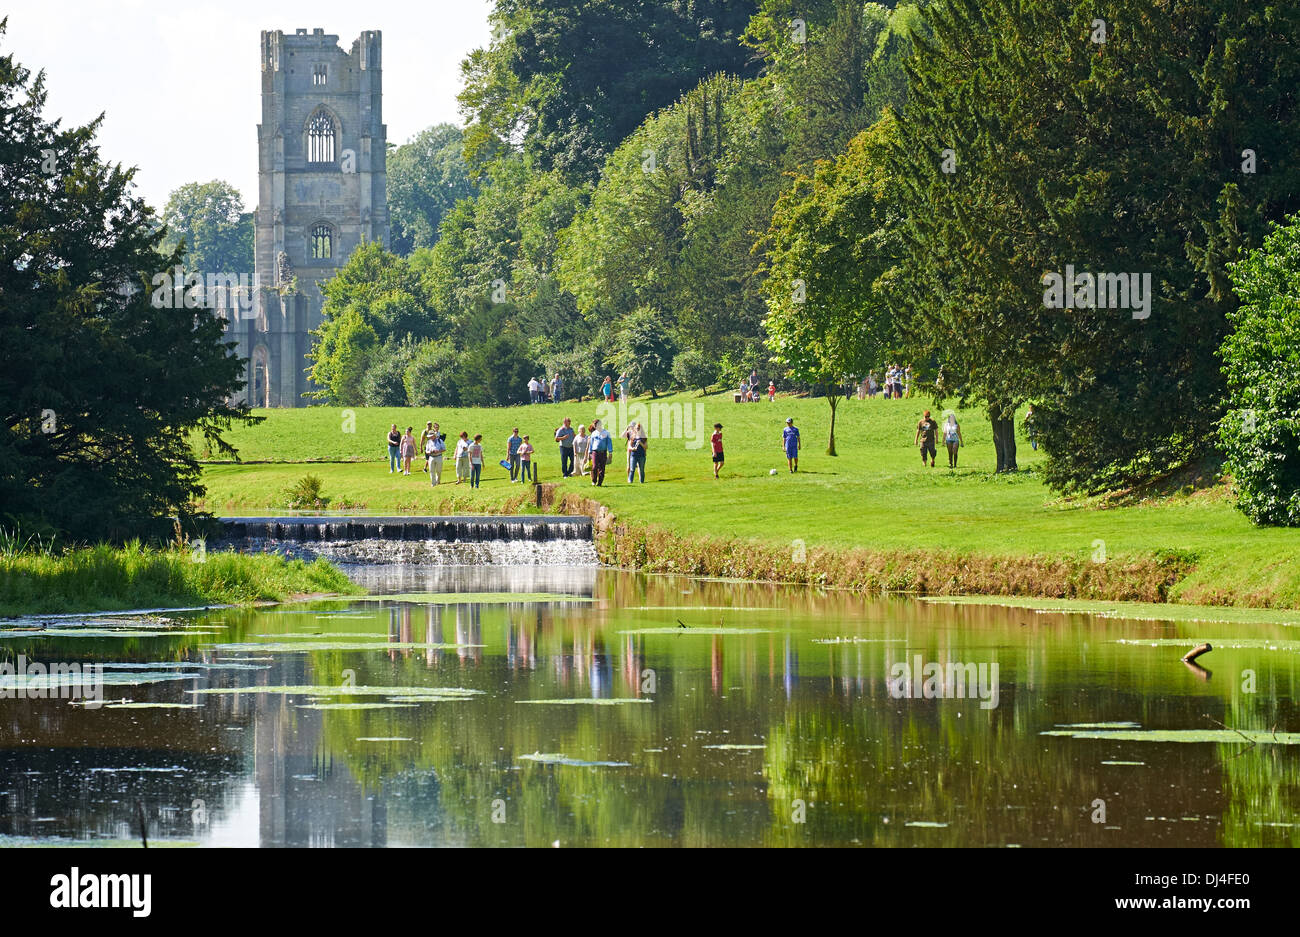 Exterior views of Fountains Abbey reflected in the river. North Yorkshire England. Stock Photo